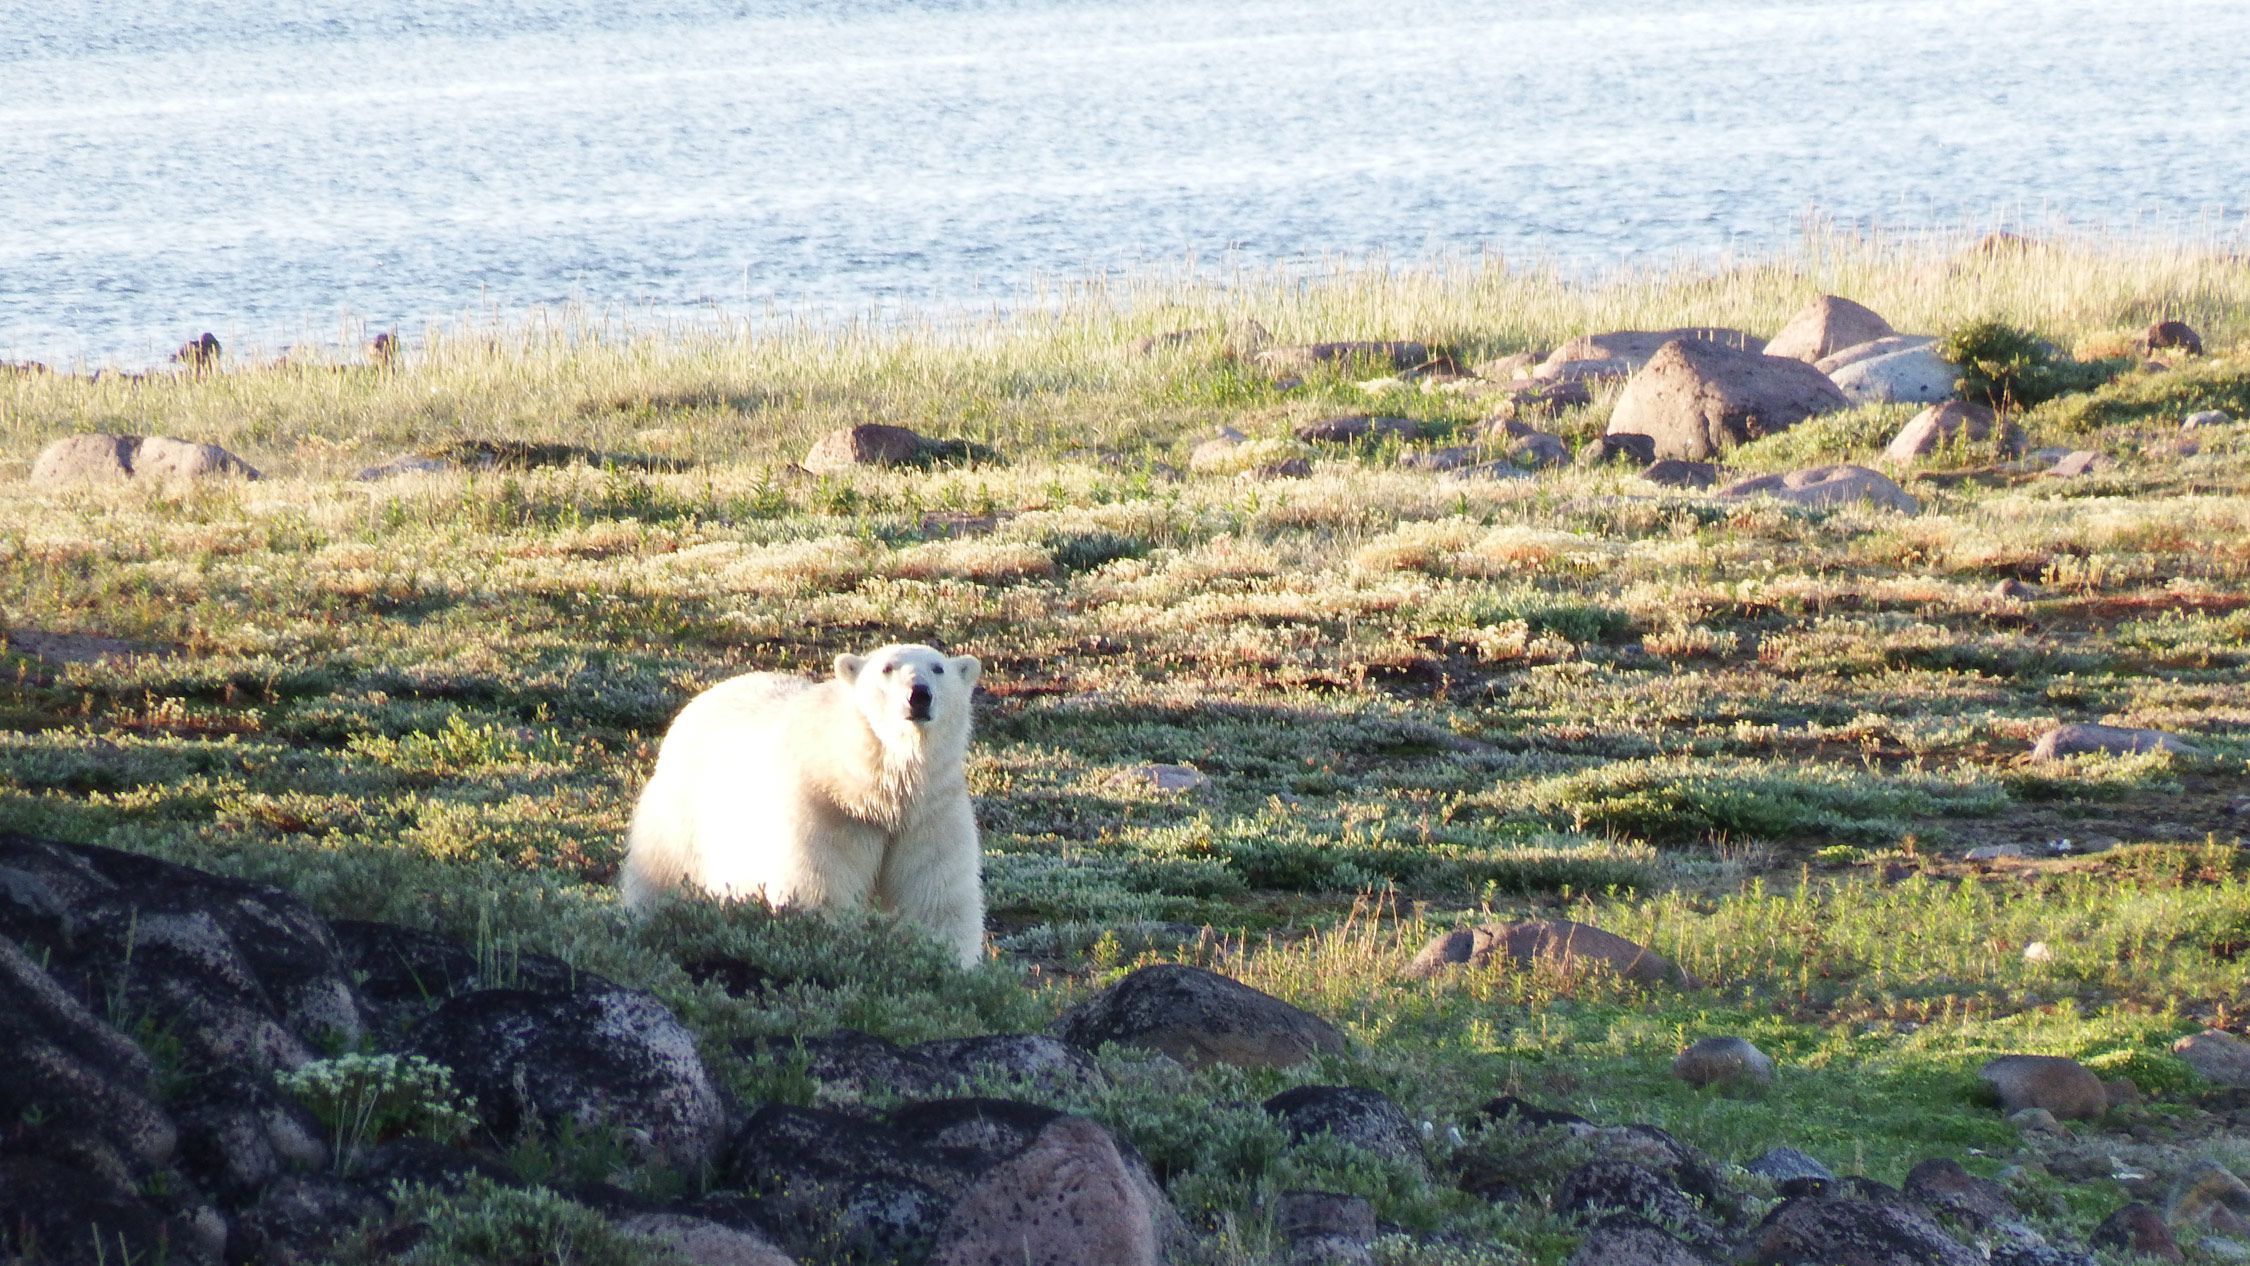 A well-nourished polar bear at Hubbard Point.